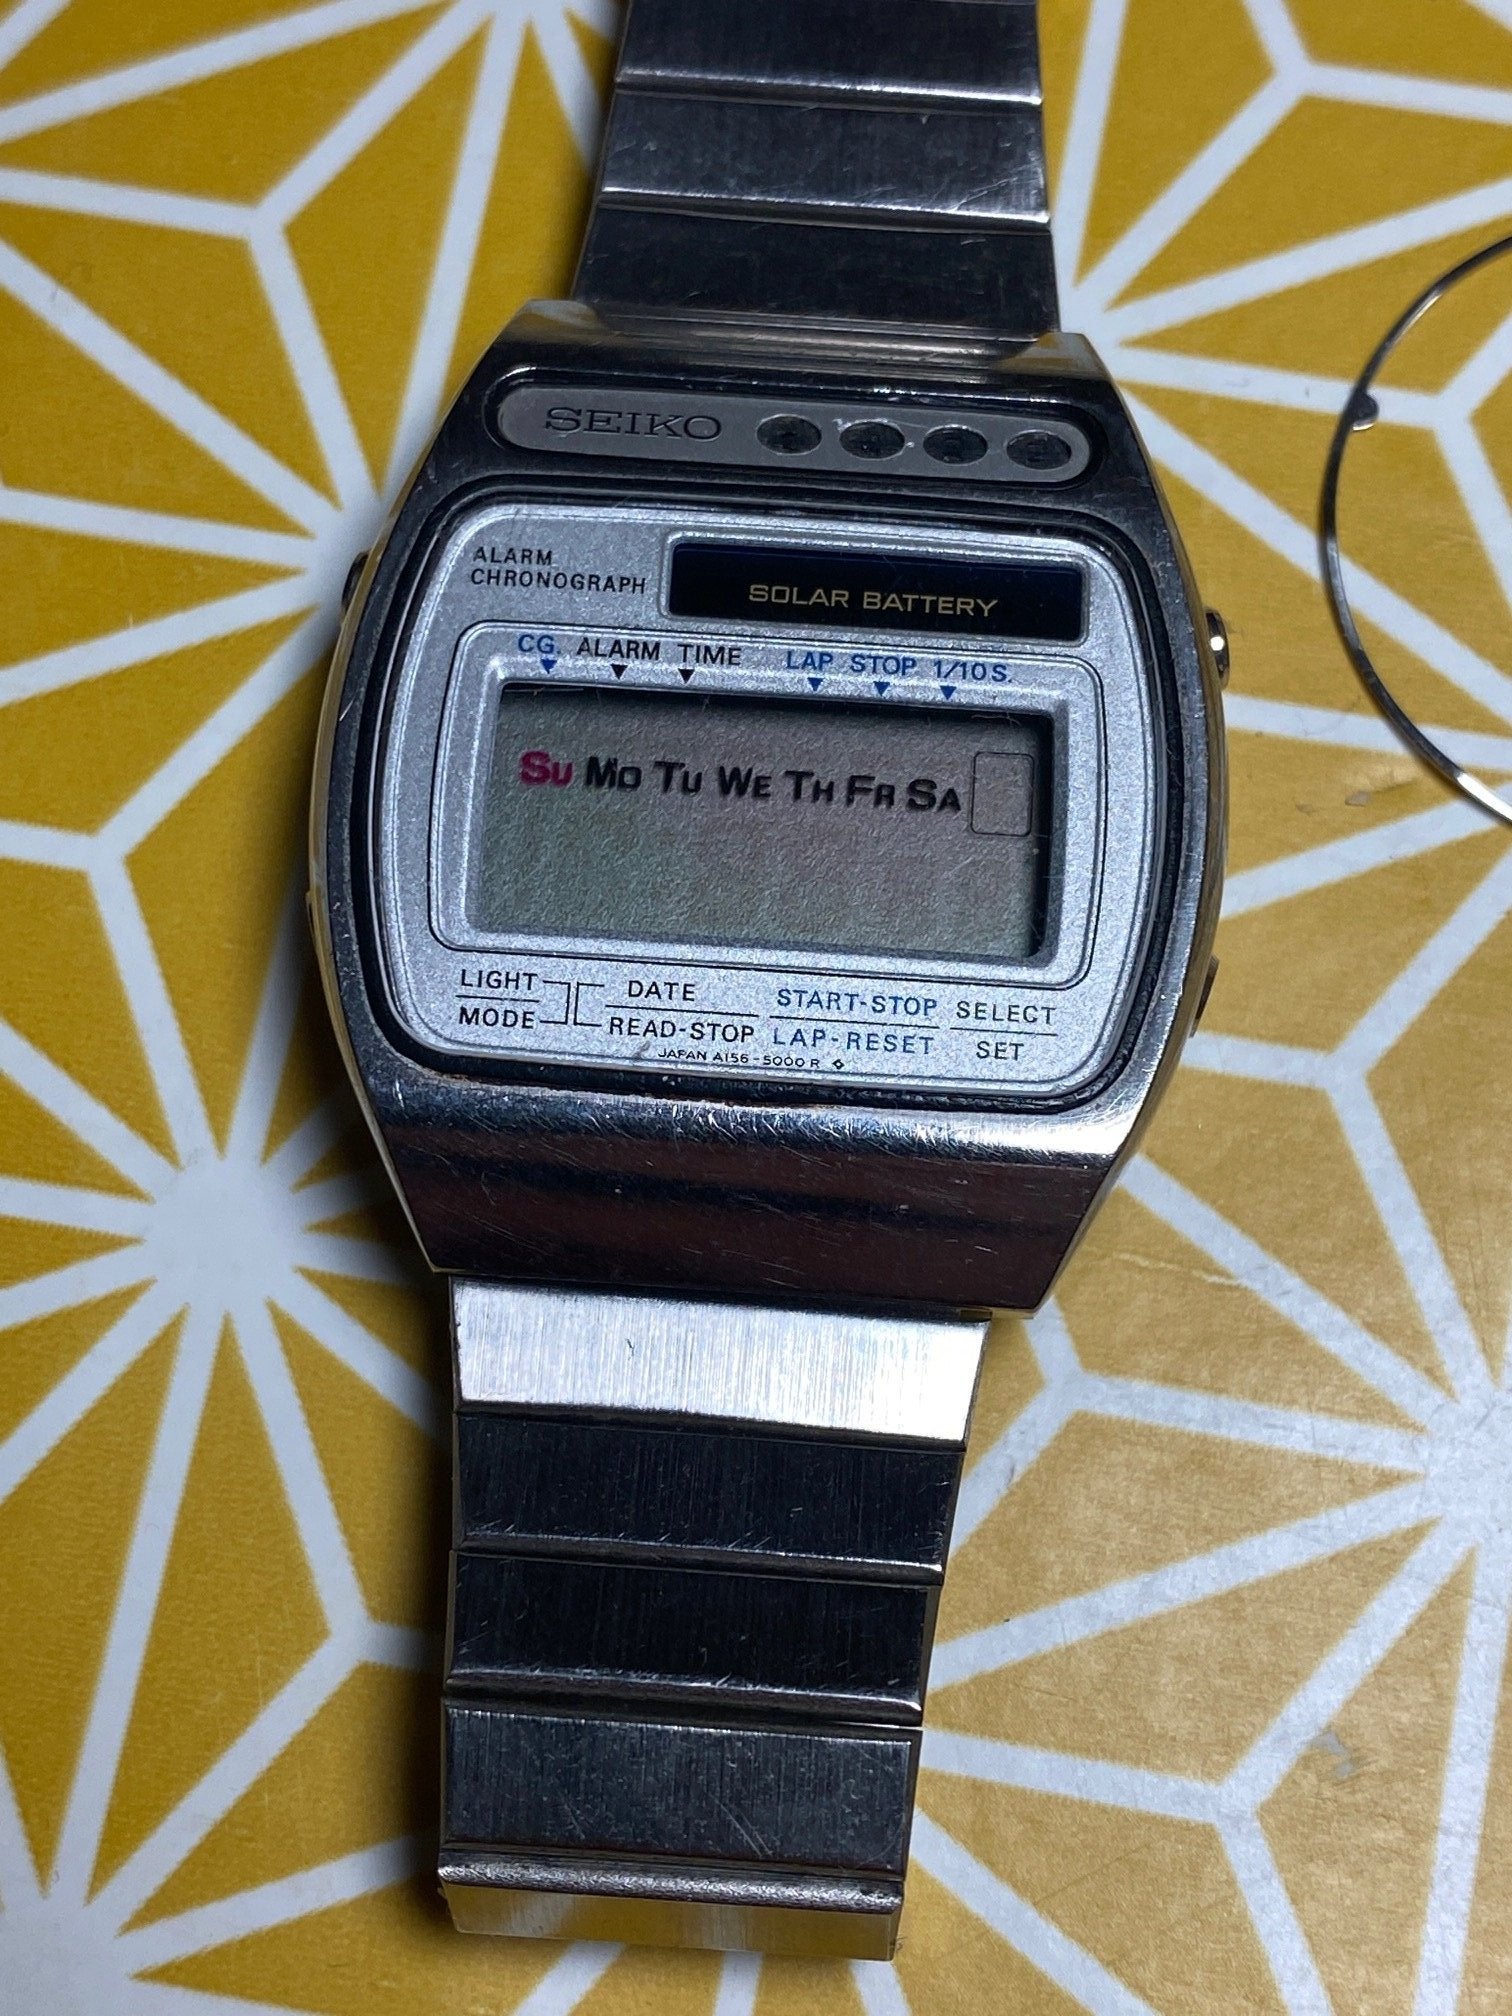 Battery issue with an old LCD A156-5000 Solar | The Watch Site